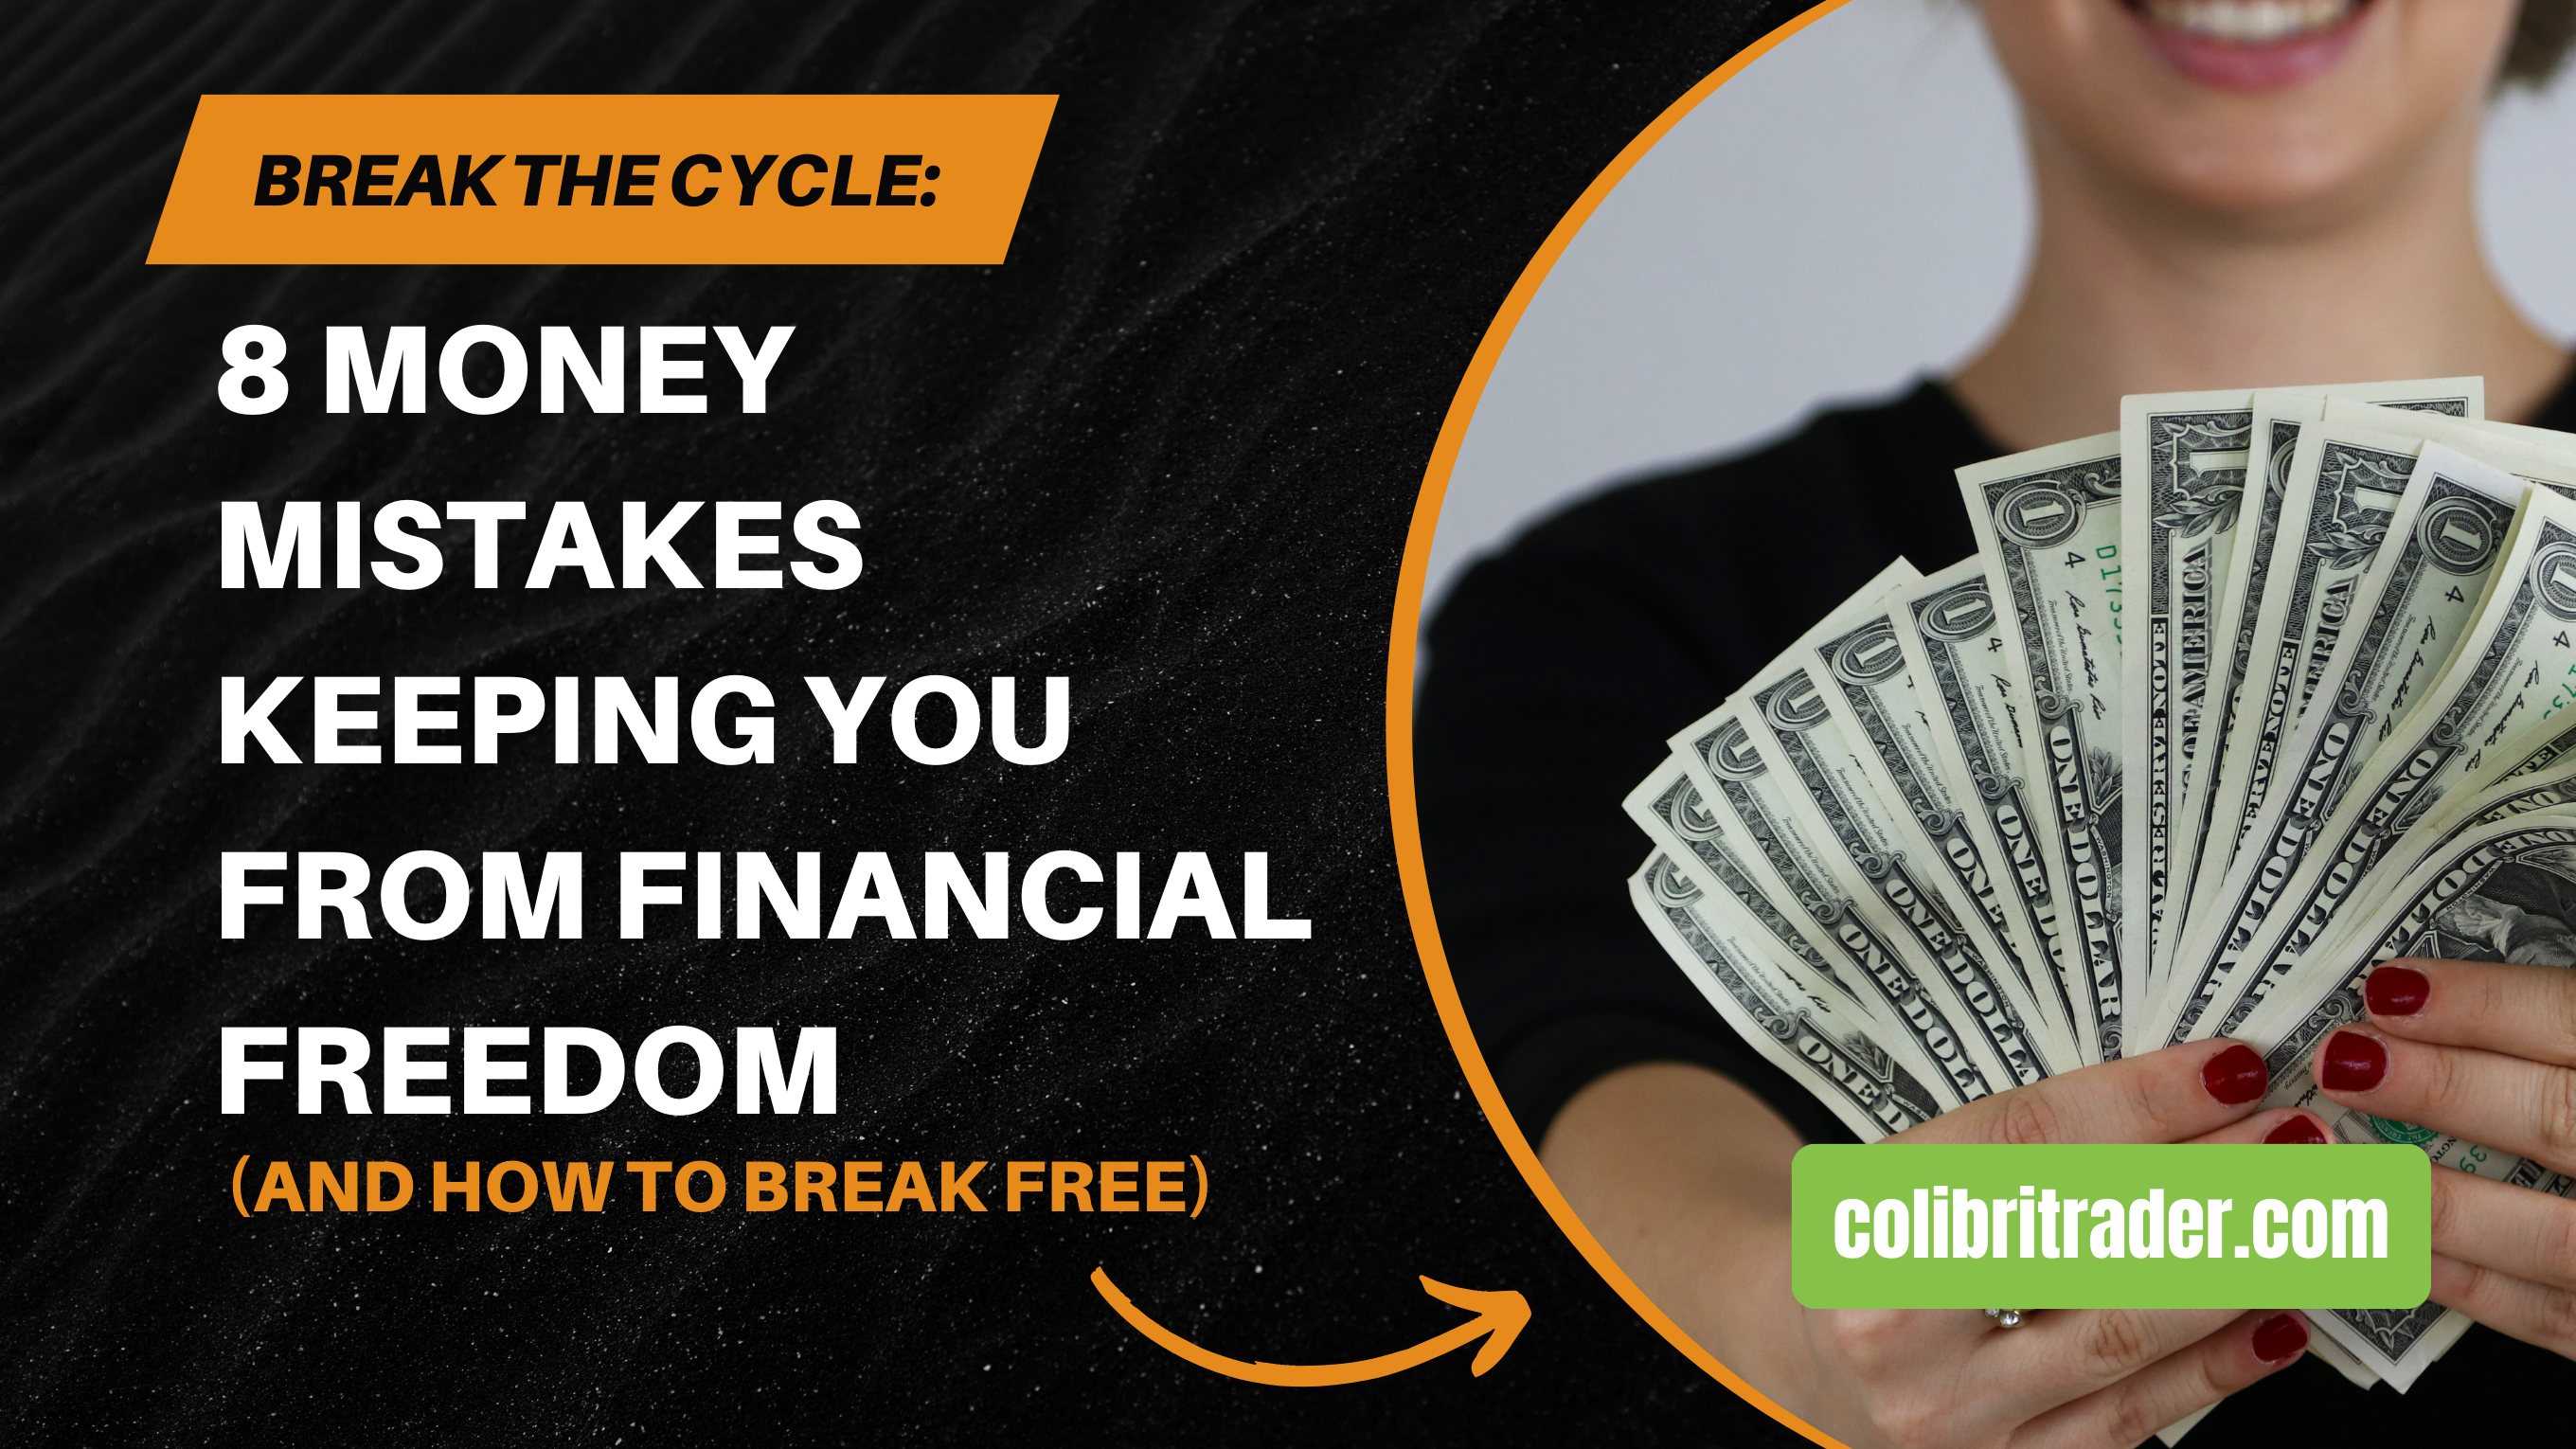 Break the Cycle: 8 Money Mistakes Keeping You From Financial Freedom (and How to Break Free)